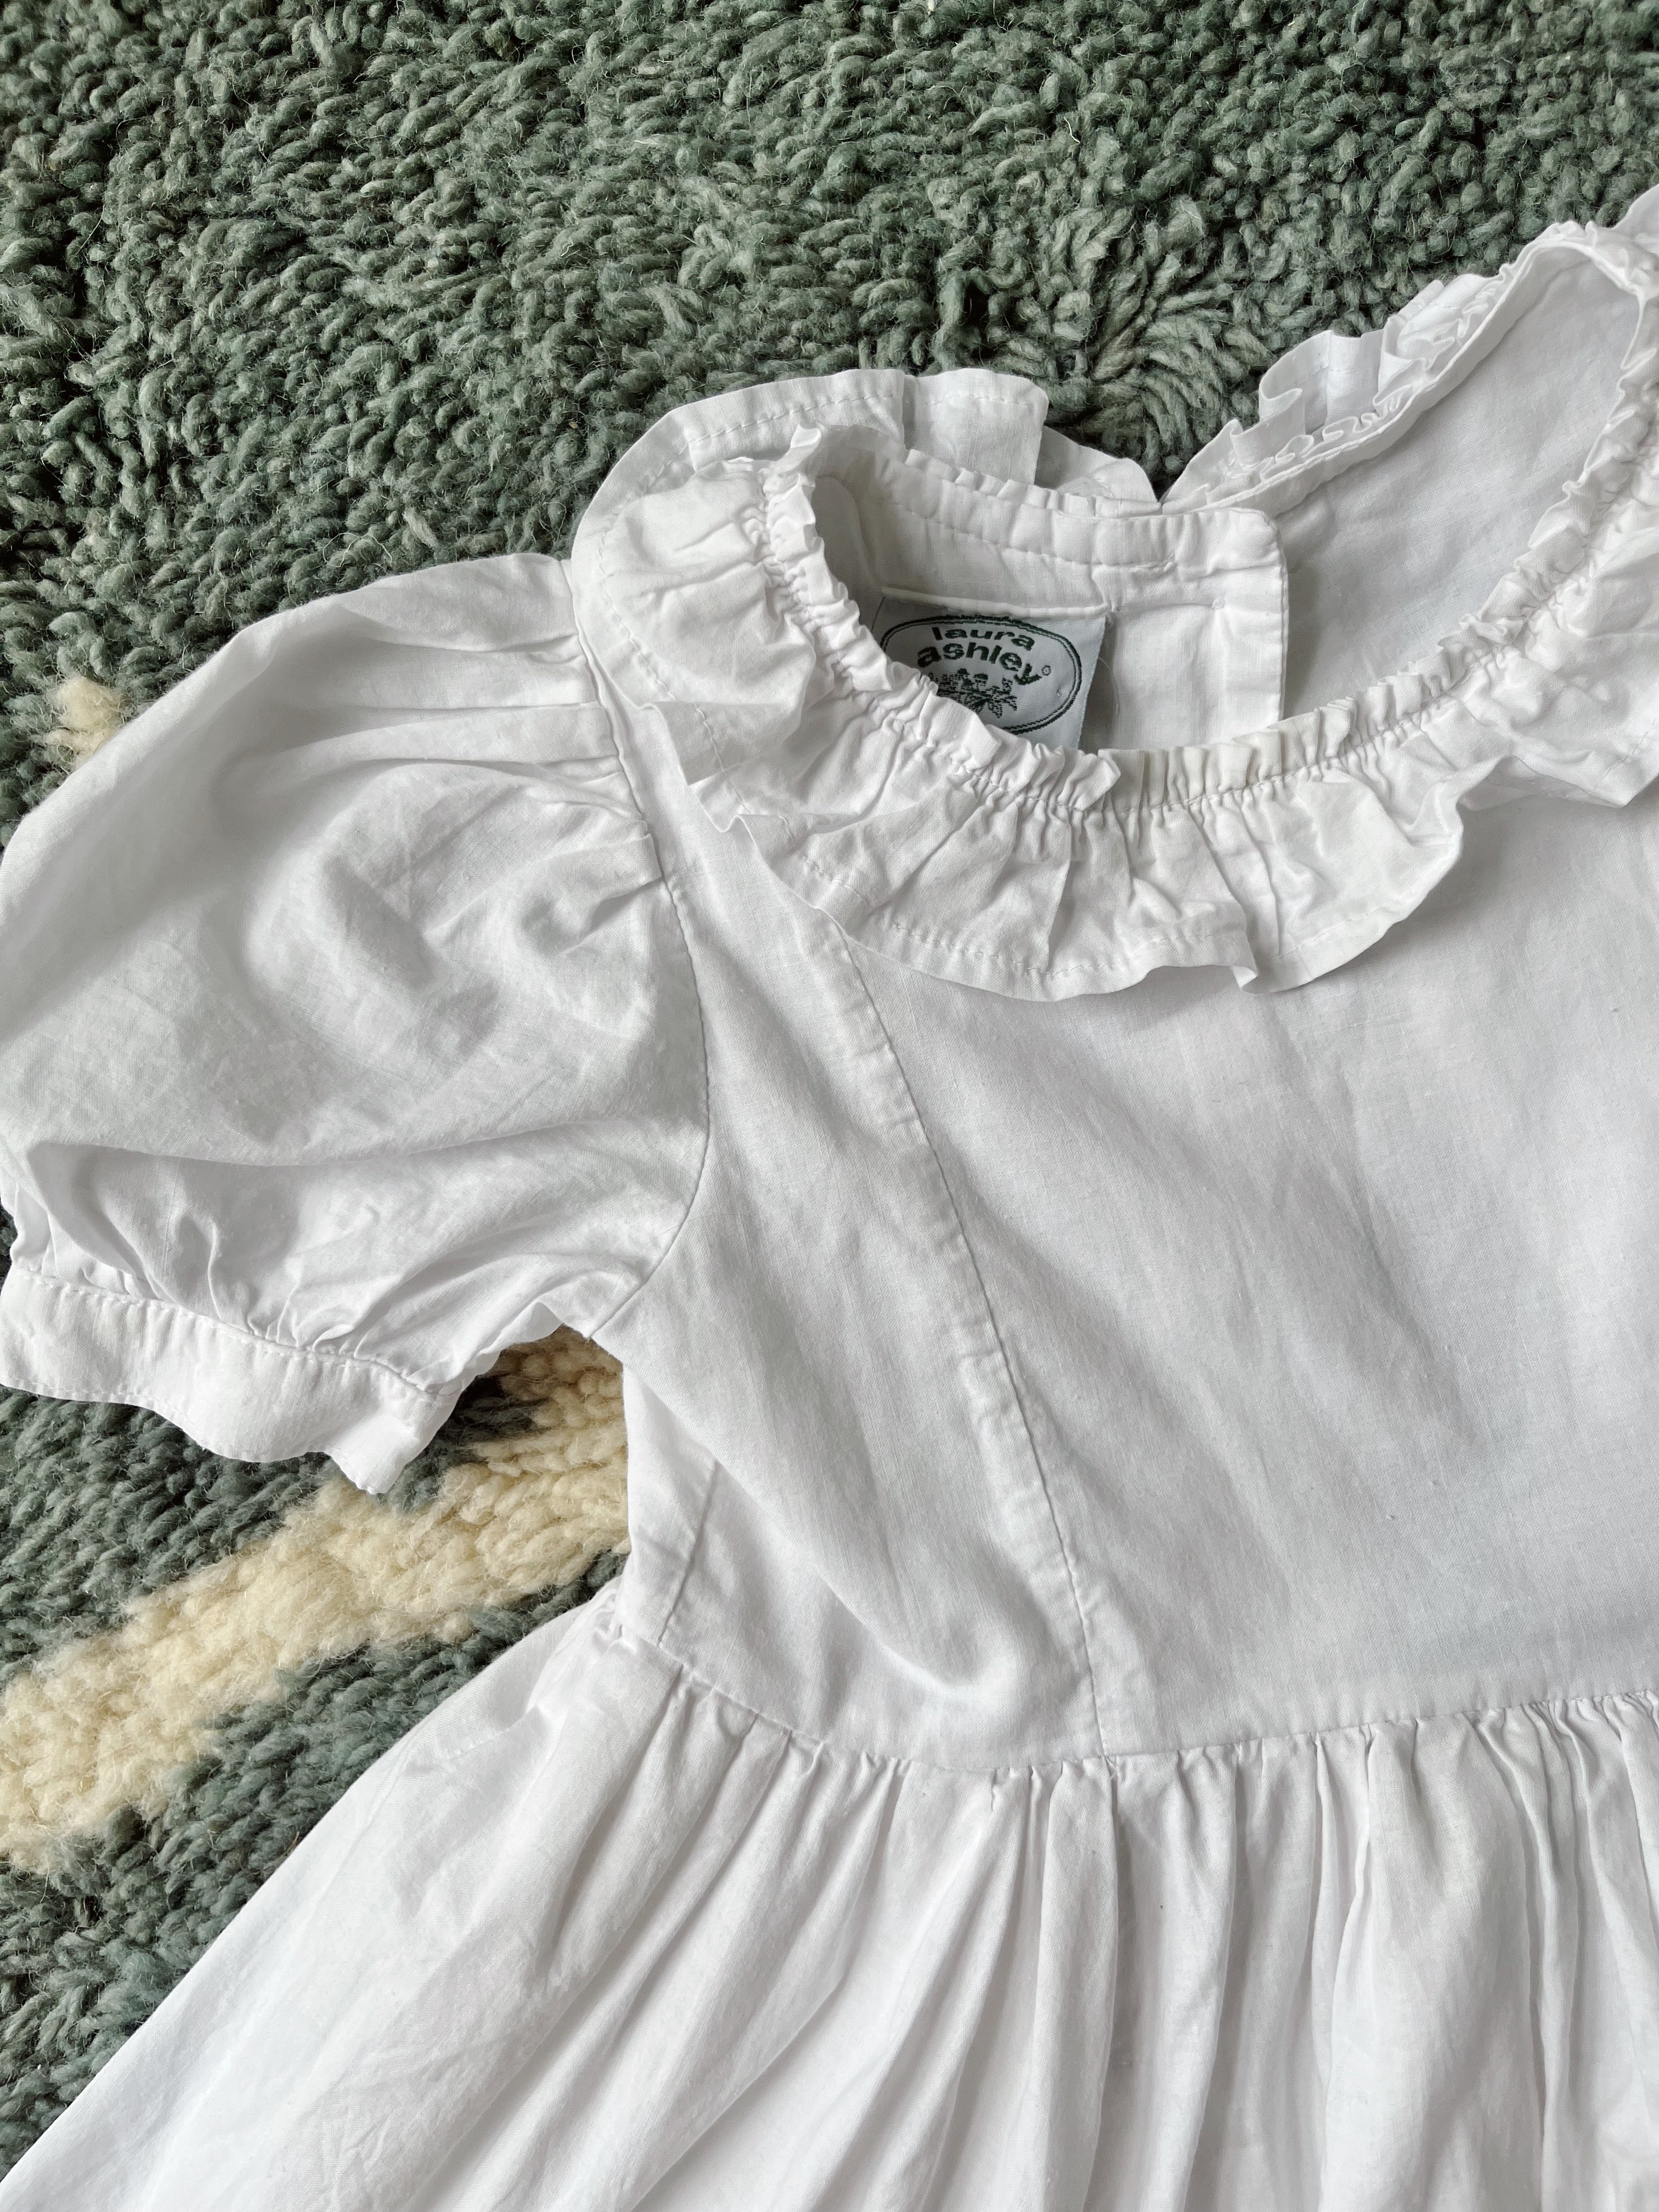 Vintage Laura Ashley white dream dress - 3-5 years - made in Great Britain